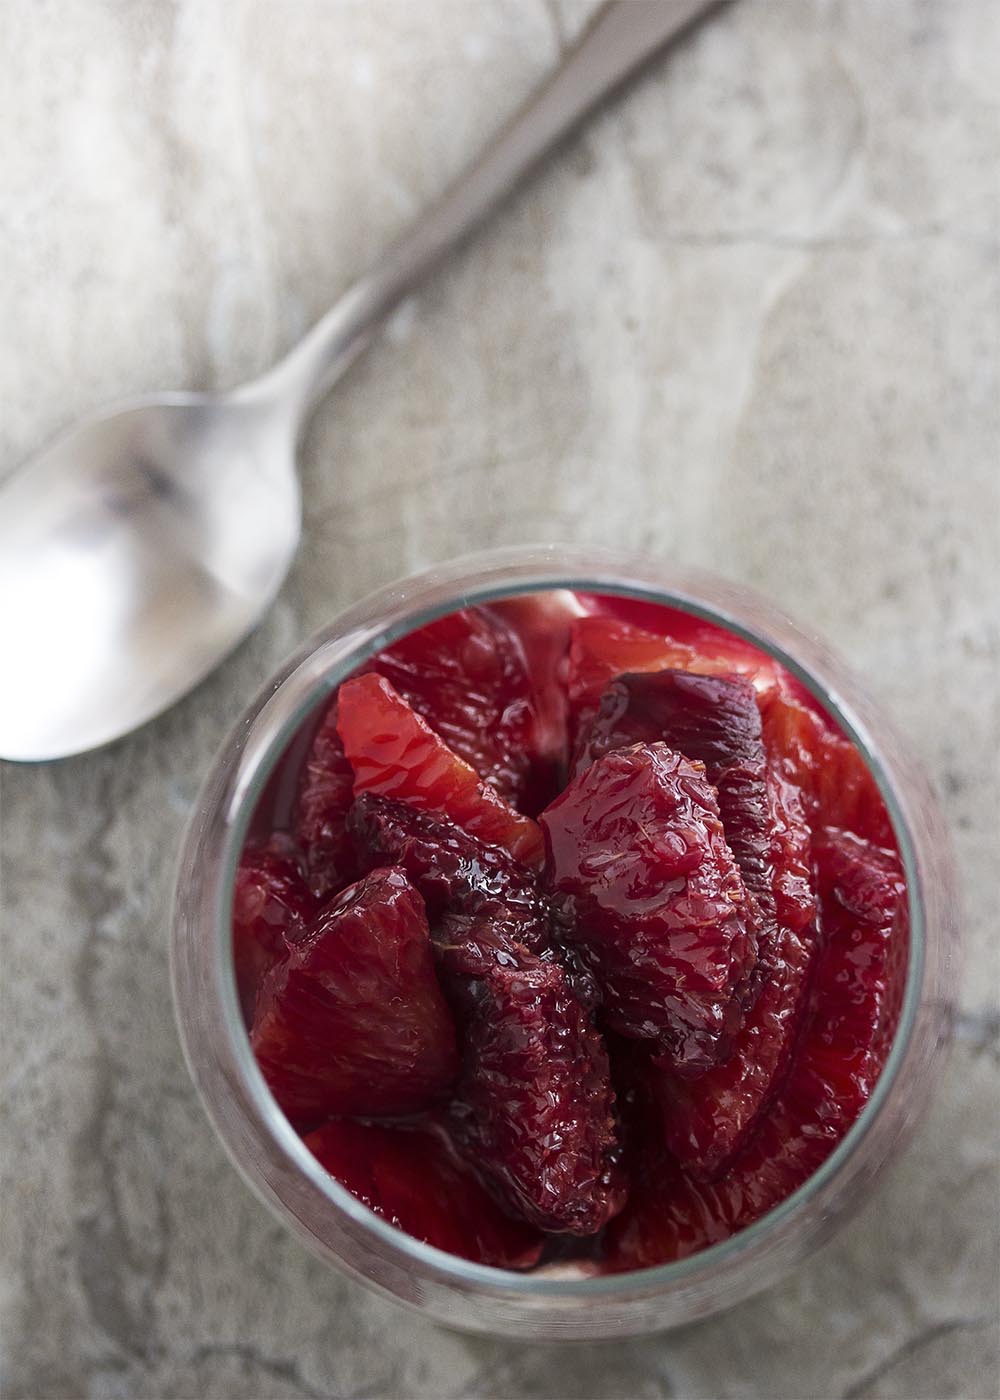 Ruby red and cinnamon spiced, this blood orange compote is a beautiful and intensely flavored sauce perfect for spooning over creamy mascarpone mousse. | justalittlebitofbacon.com